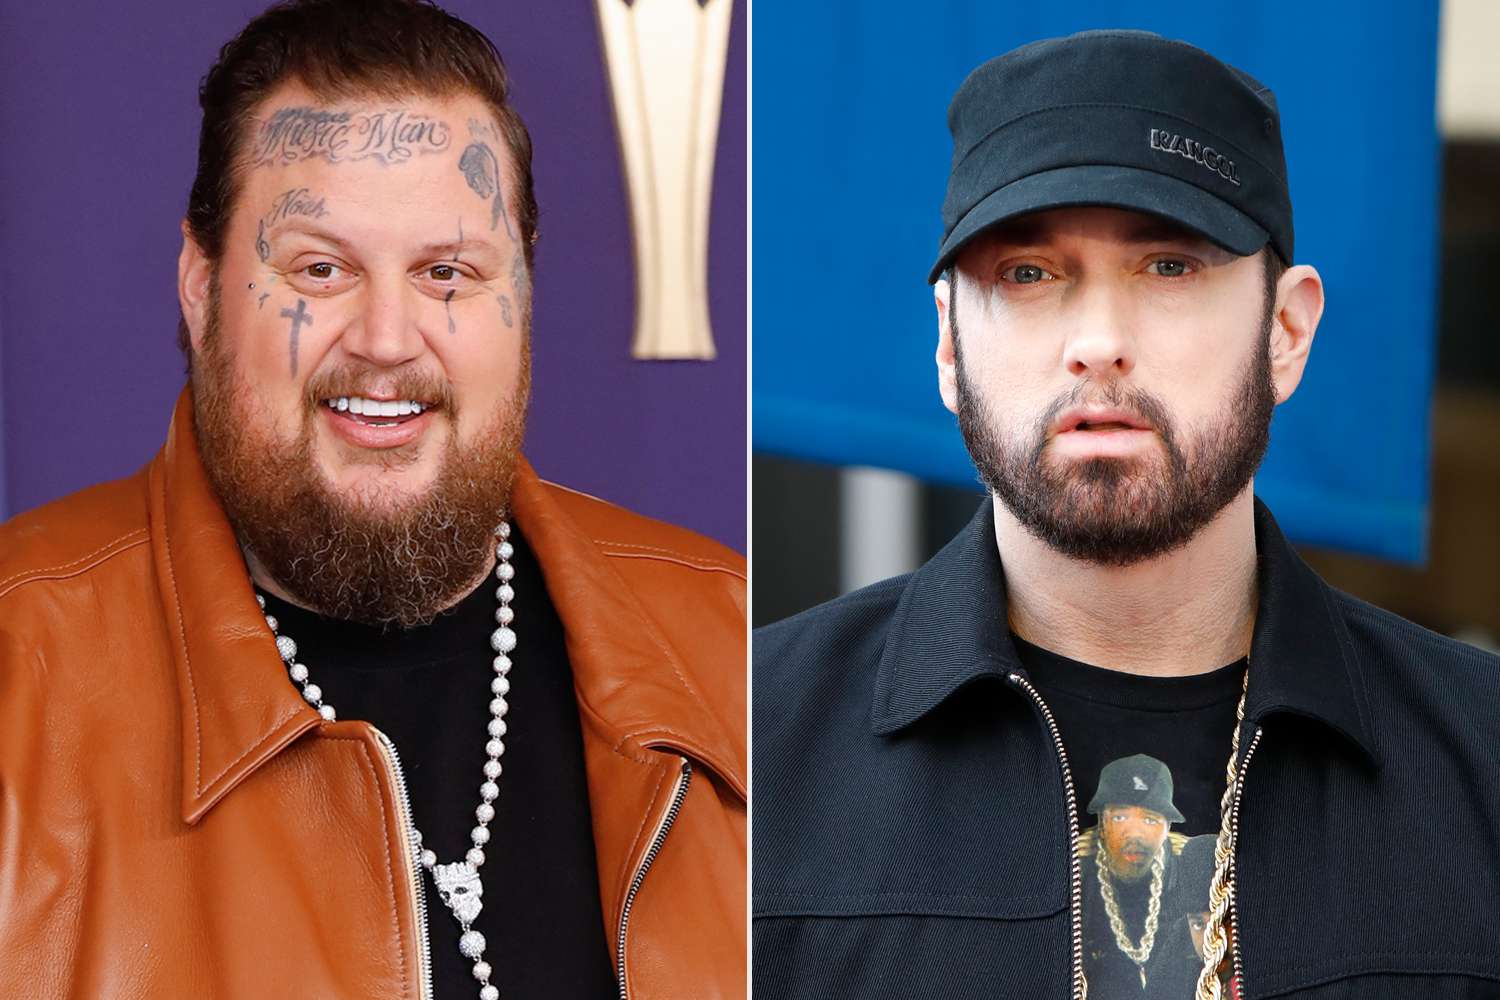 Jelly Roll 'Can't Believe' His 'Childhood Hero' Eminem Sampled His Hit 'Save Me' for 'Death of Slim Shady' Album